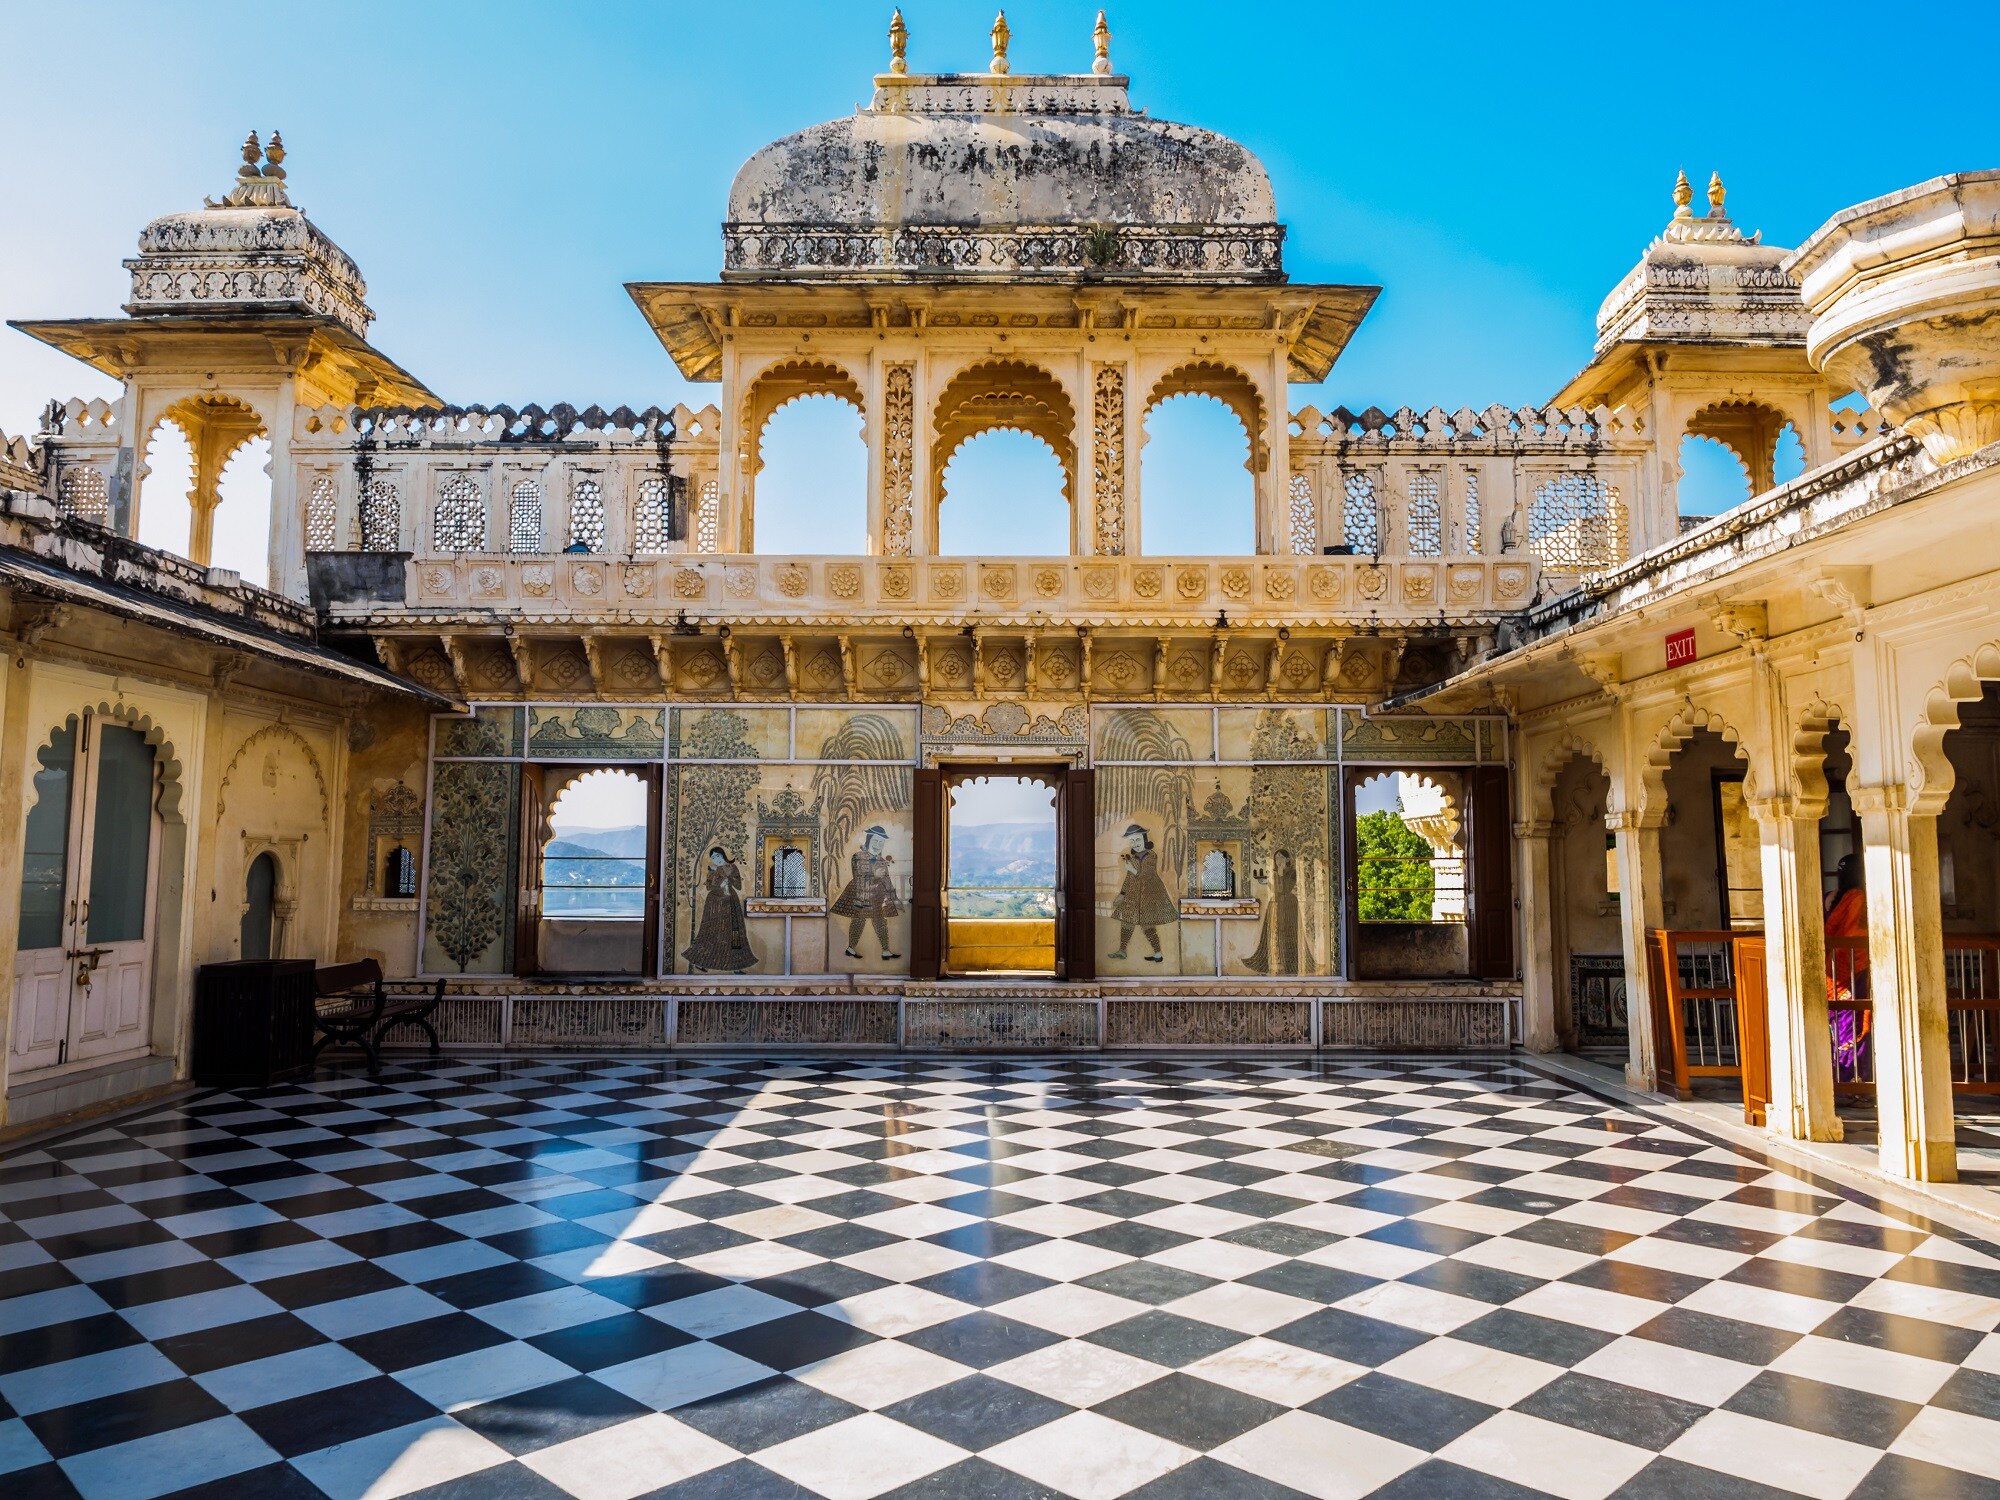 Shutterstock 272179106 Courtyard At City Palace In Udaipur Rajasthan India